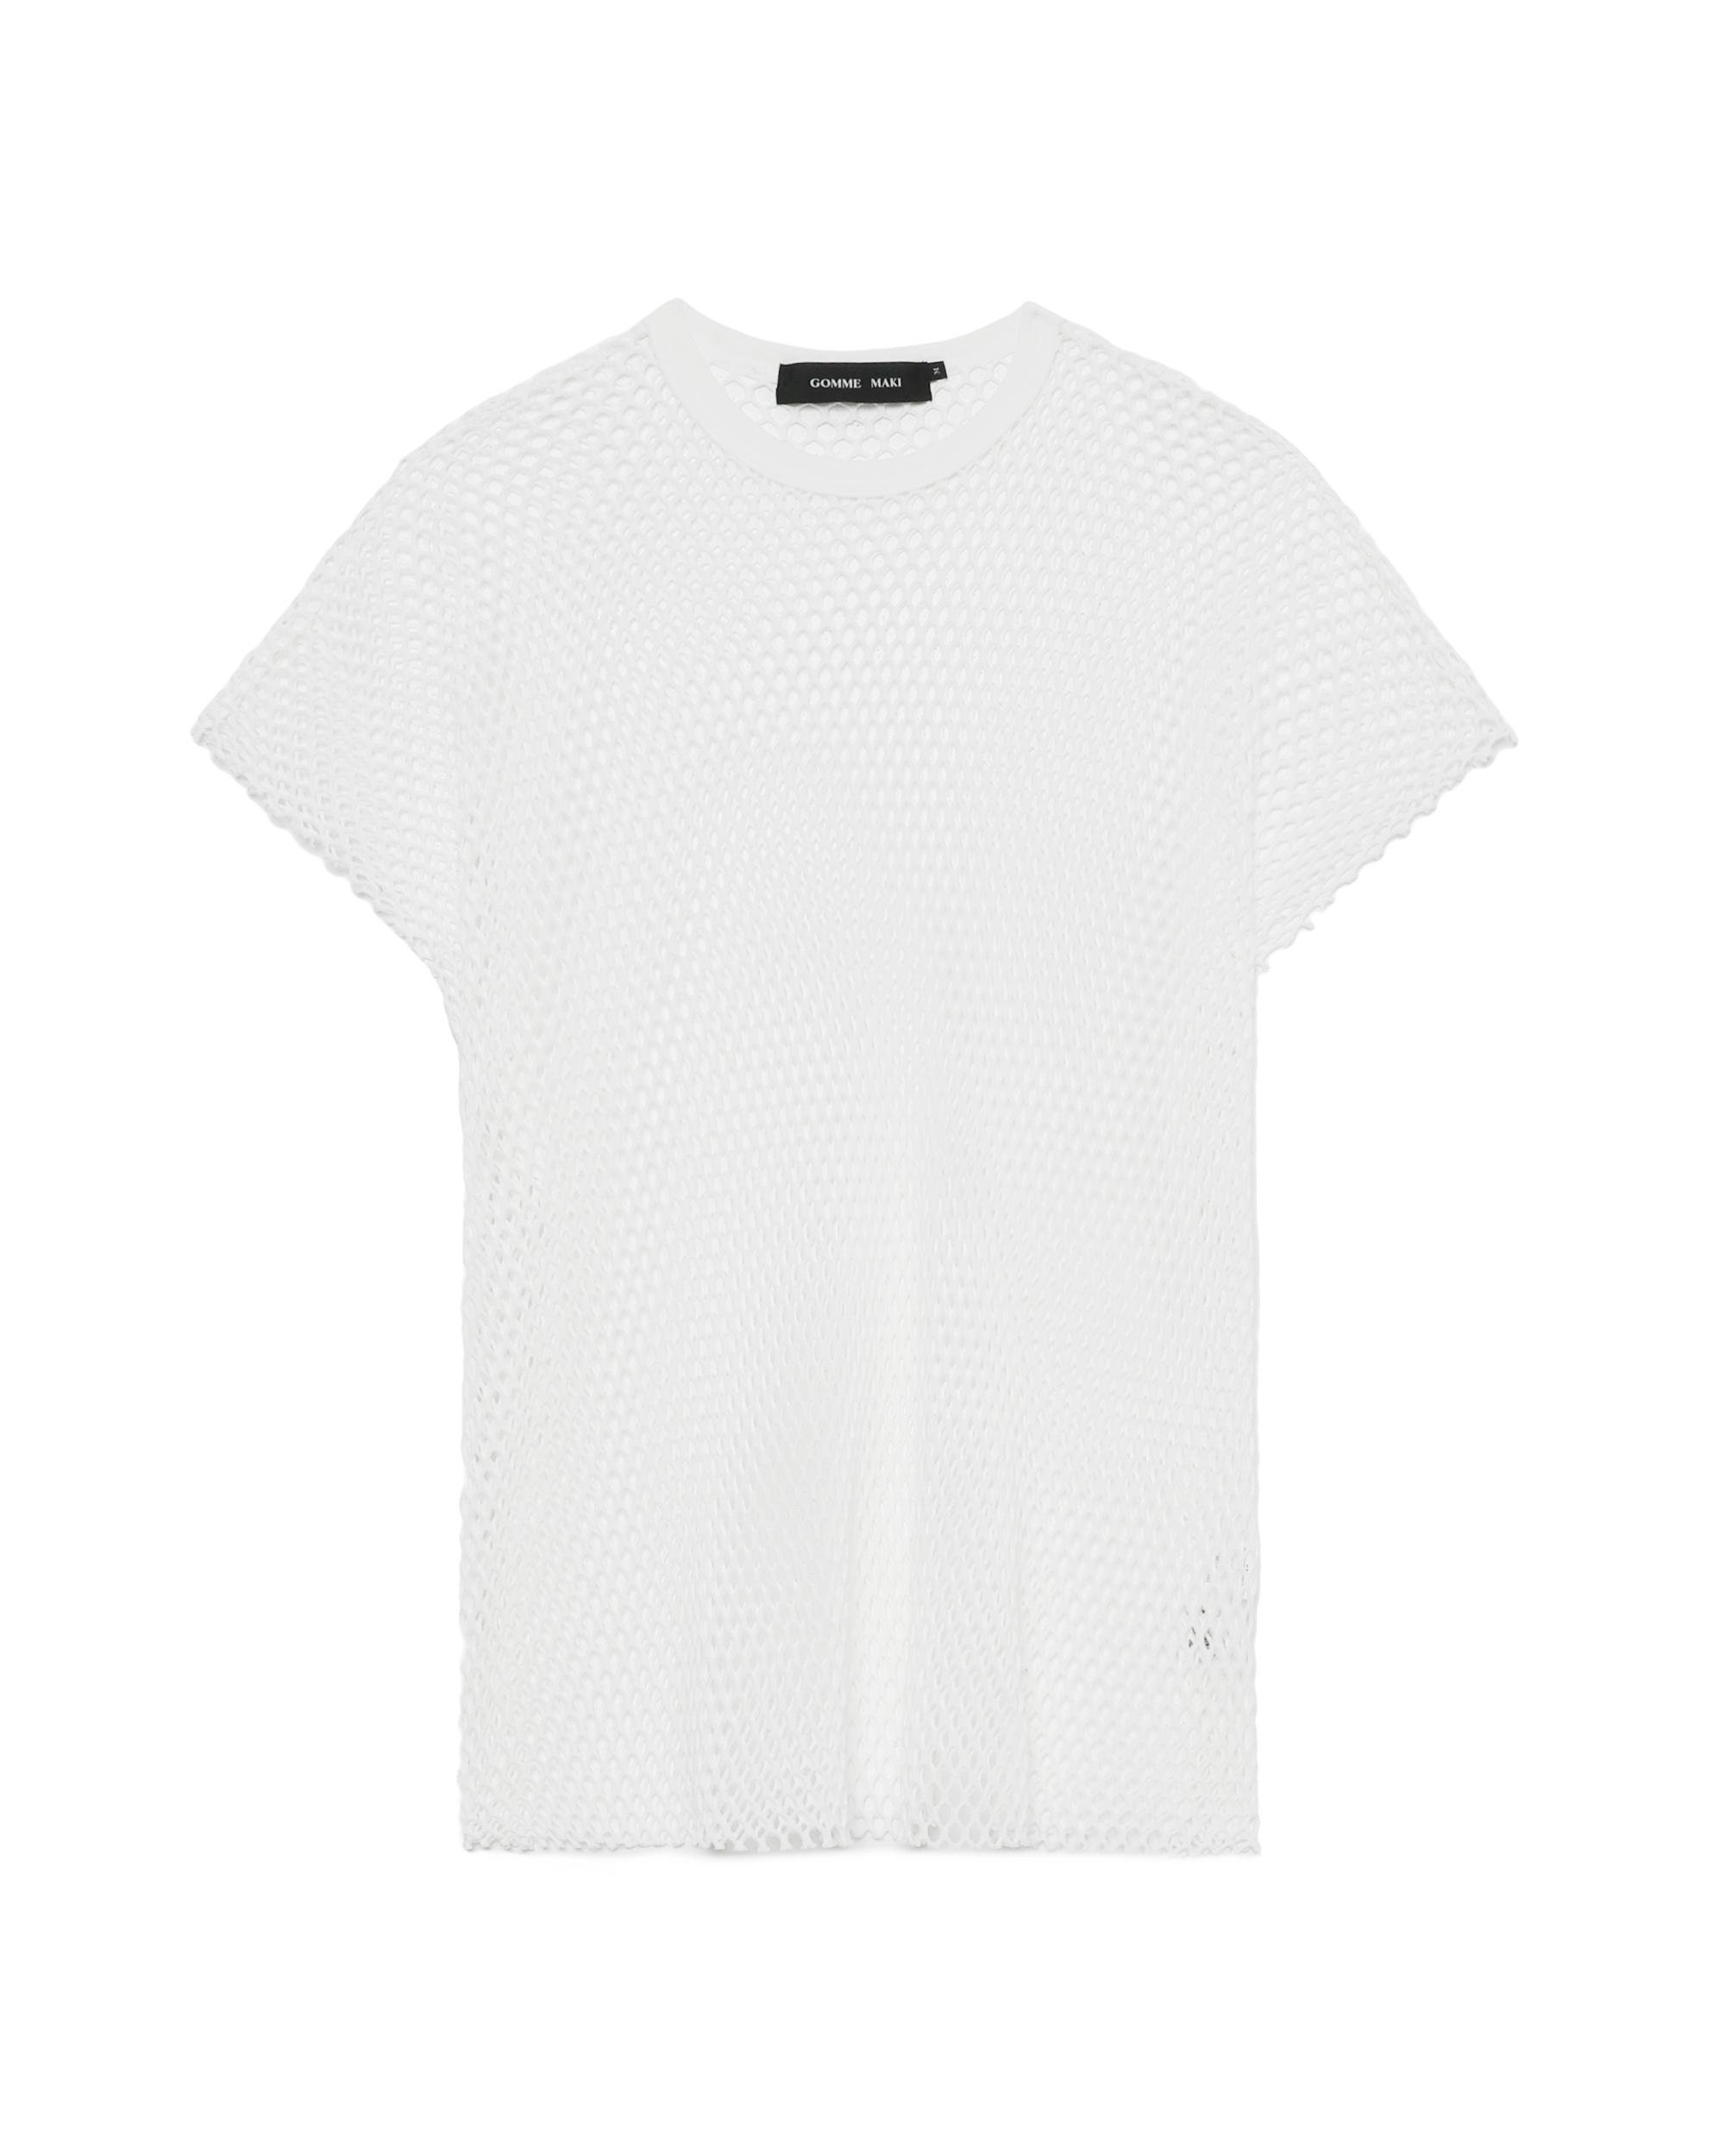 Square shirt by GOMME